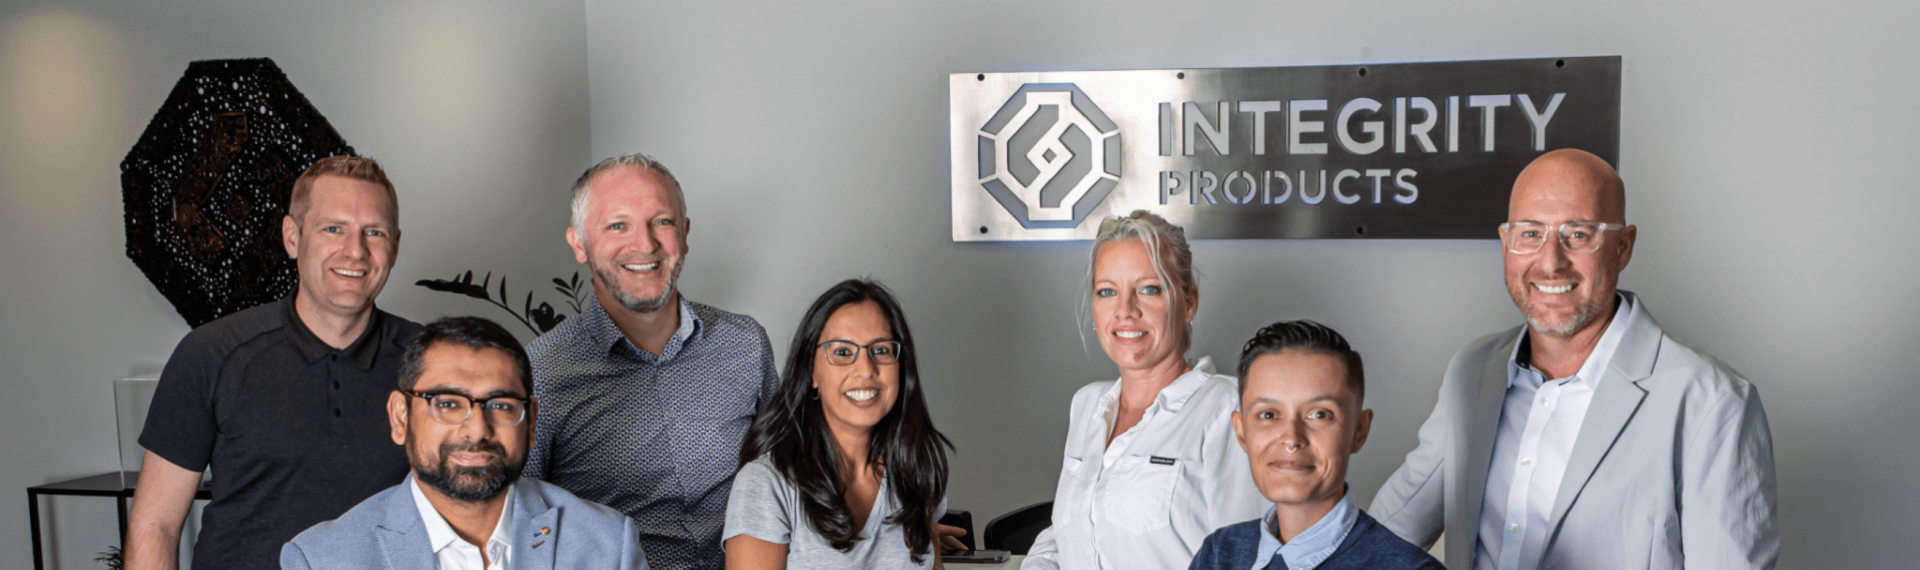 Integrity Products Team